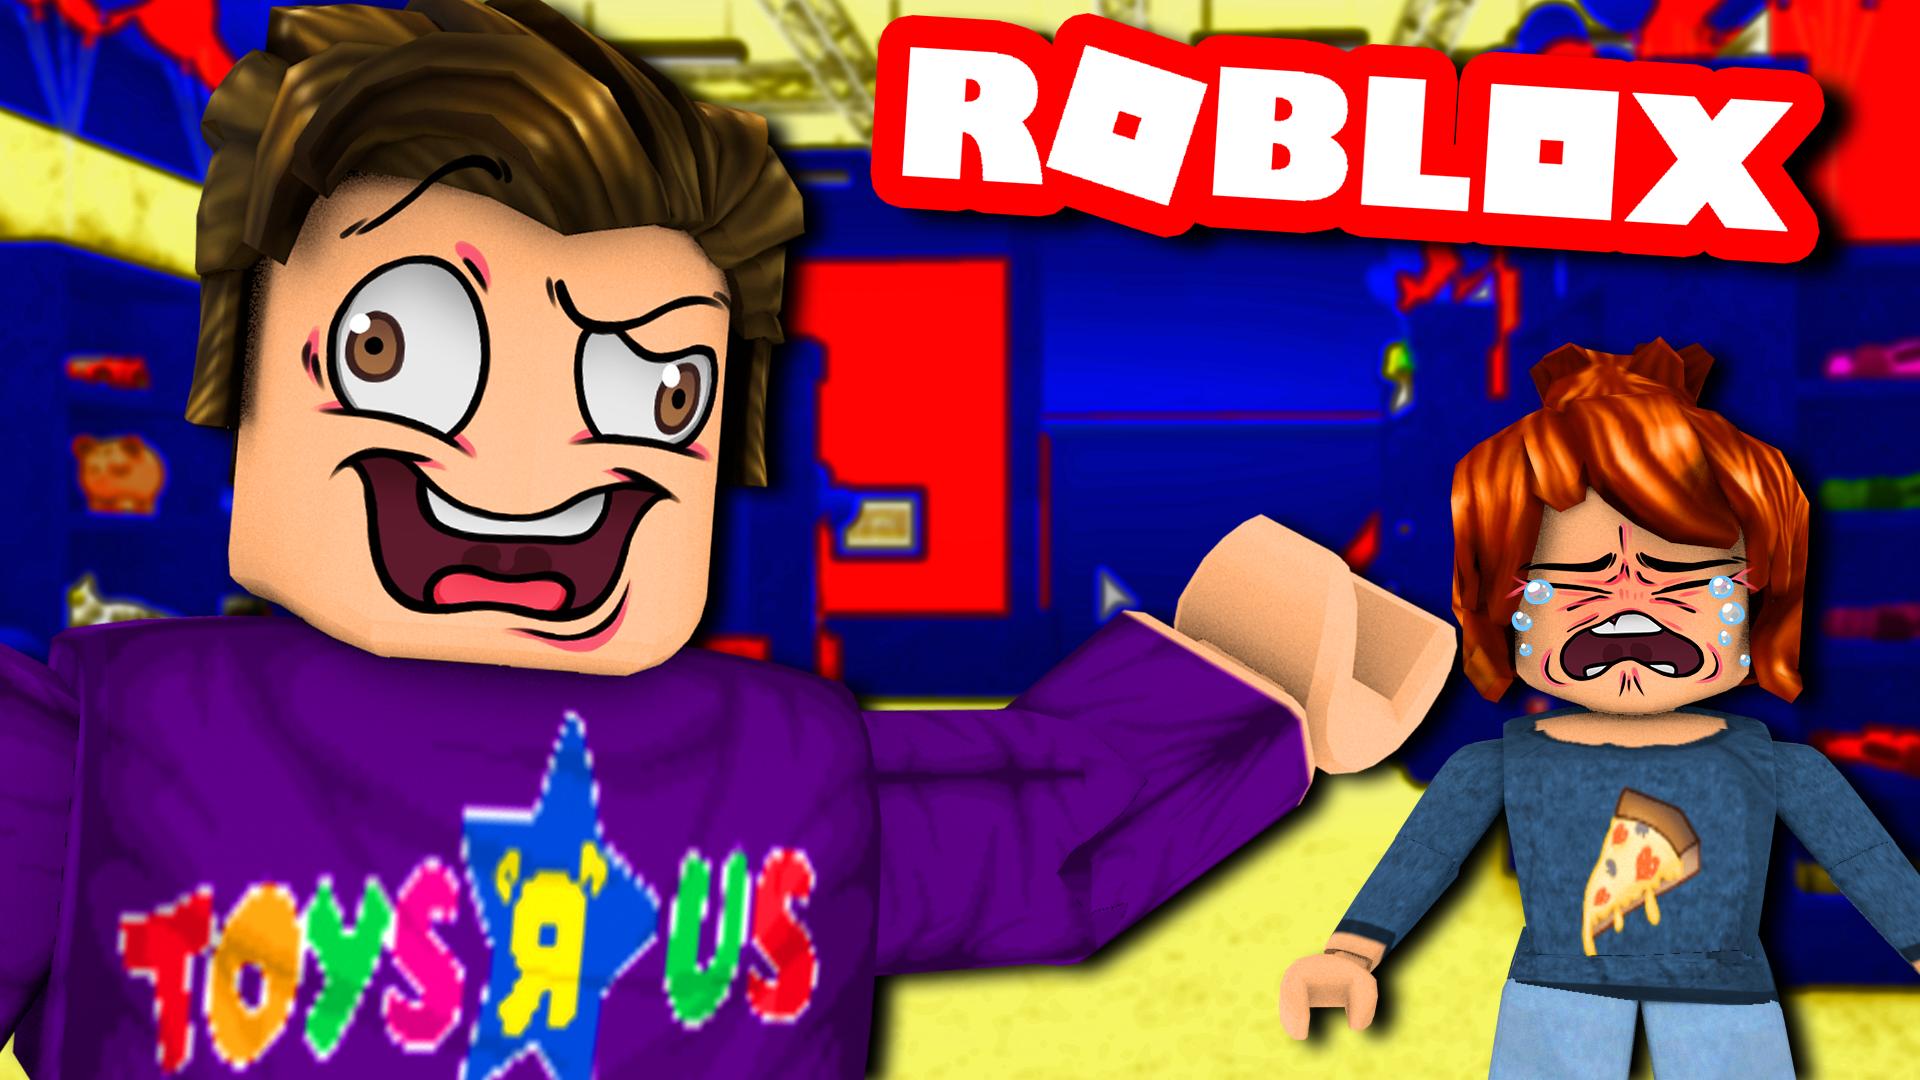 Jake On Twitter Beyond Excited To Incorporate Ally S Face Art Into My Thumbnails This Was Created From Premade Faces She Made Before She Left For Vaca So They Get Even Better Https T Co L9wiuc4qfb - what is jayingee roblox username